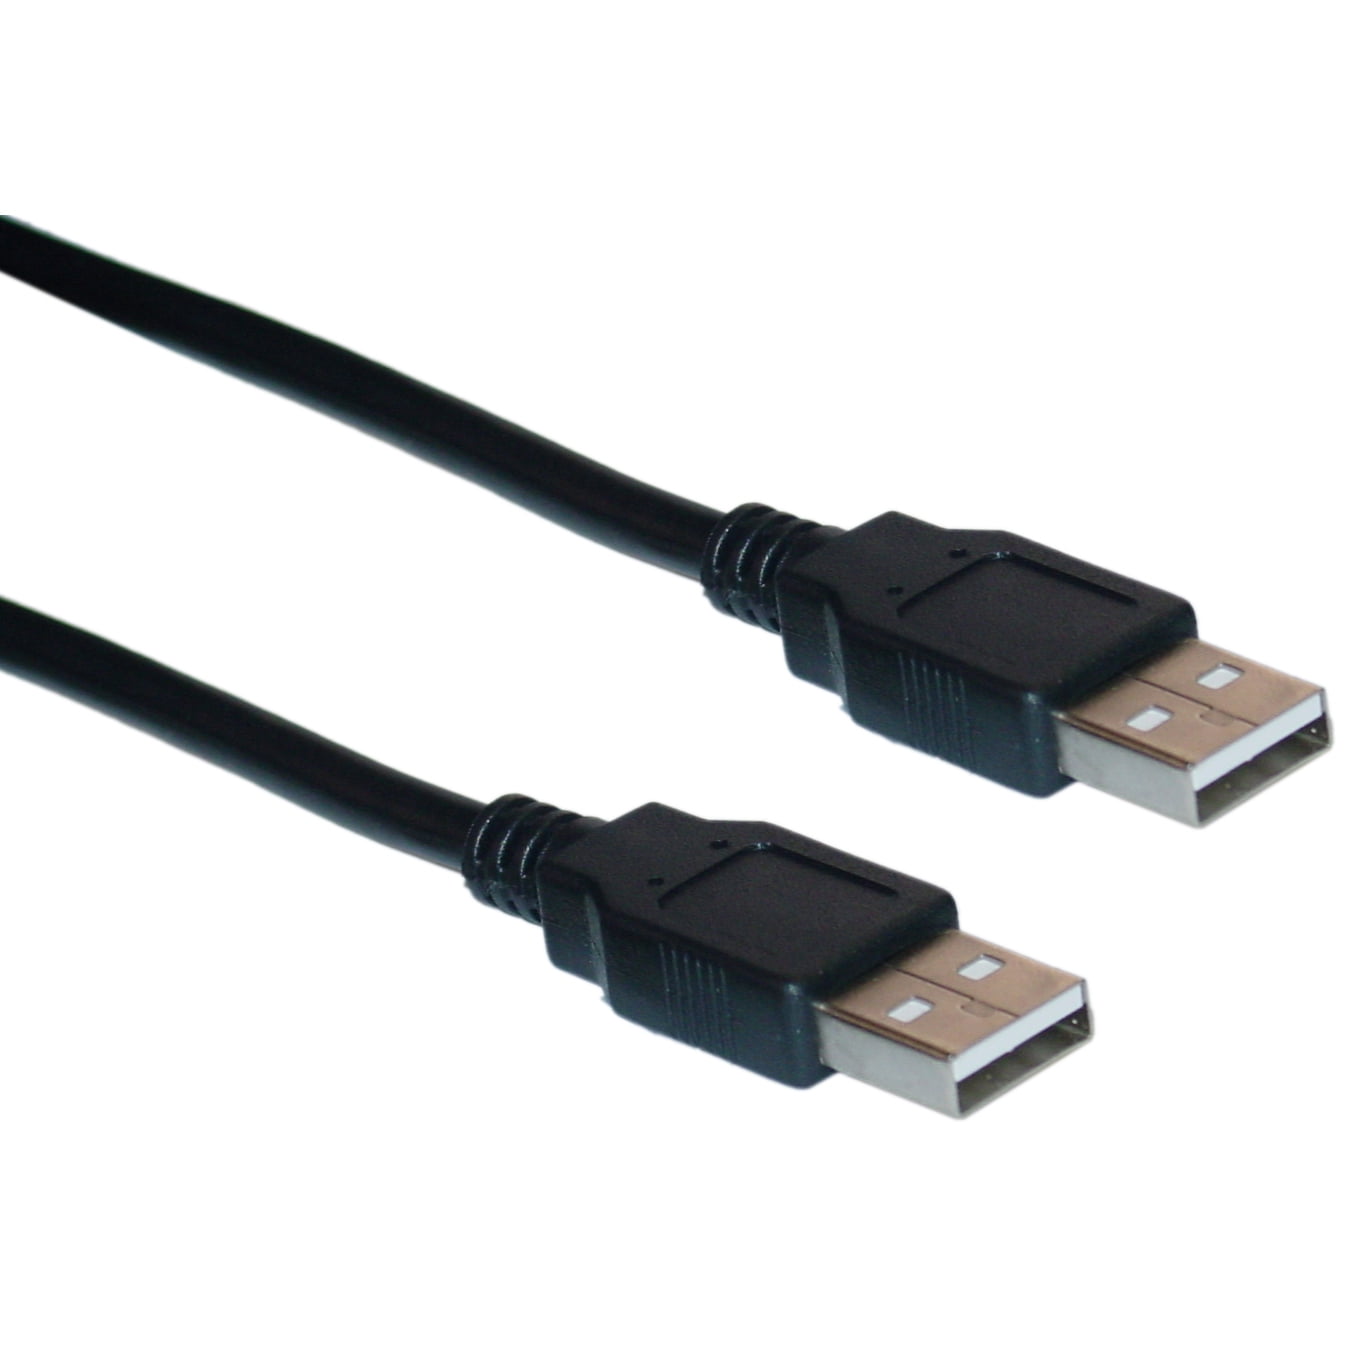 PE USB 2.0 A-Male to A-Male Cable 6ft 